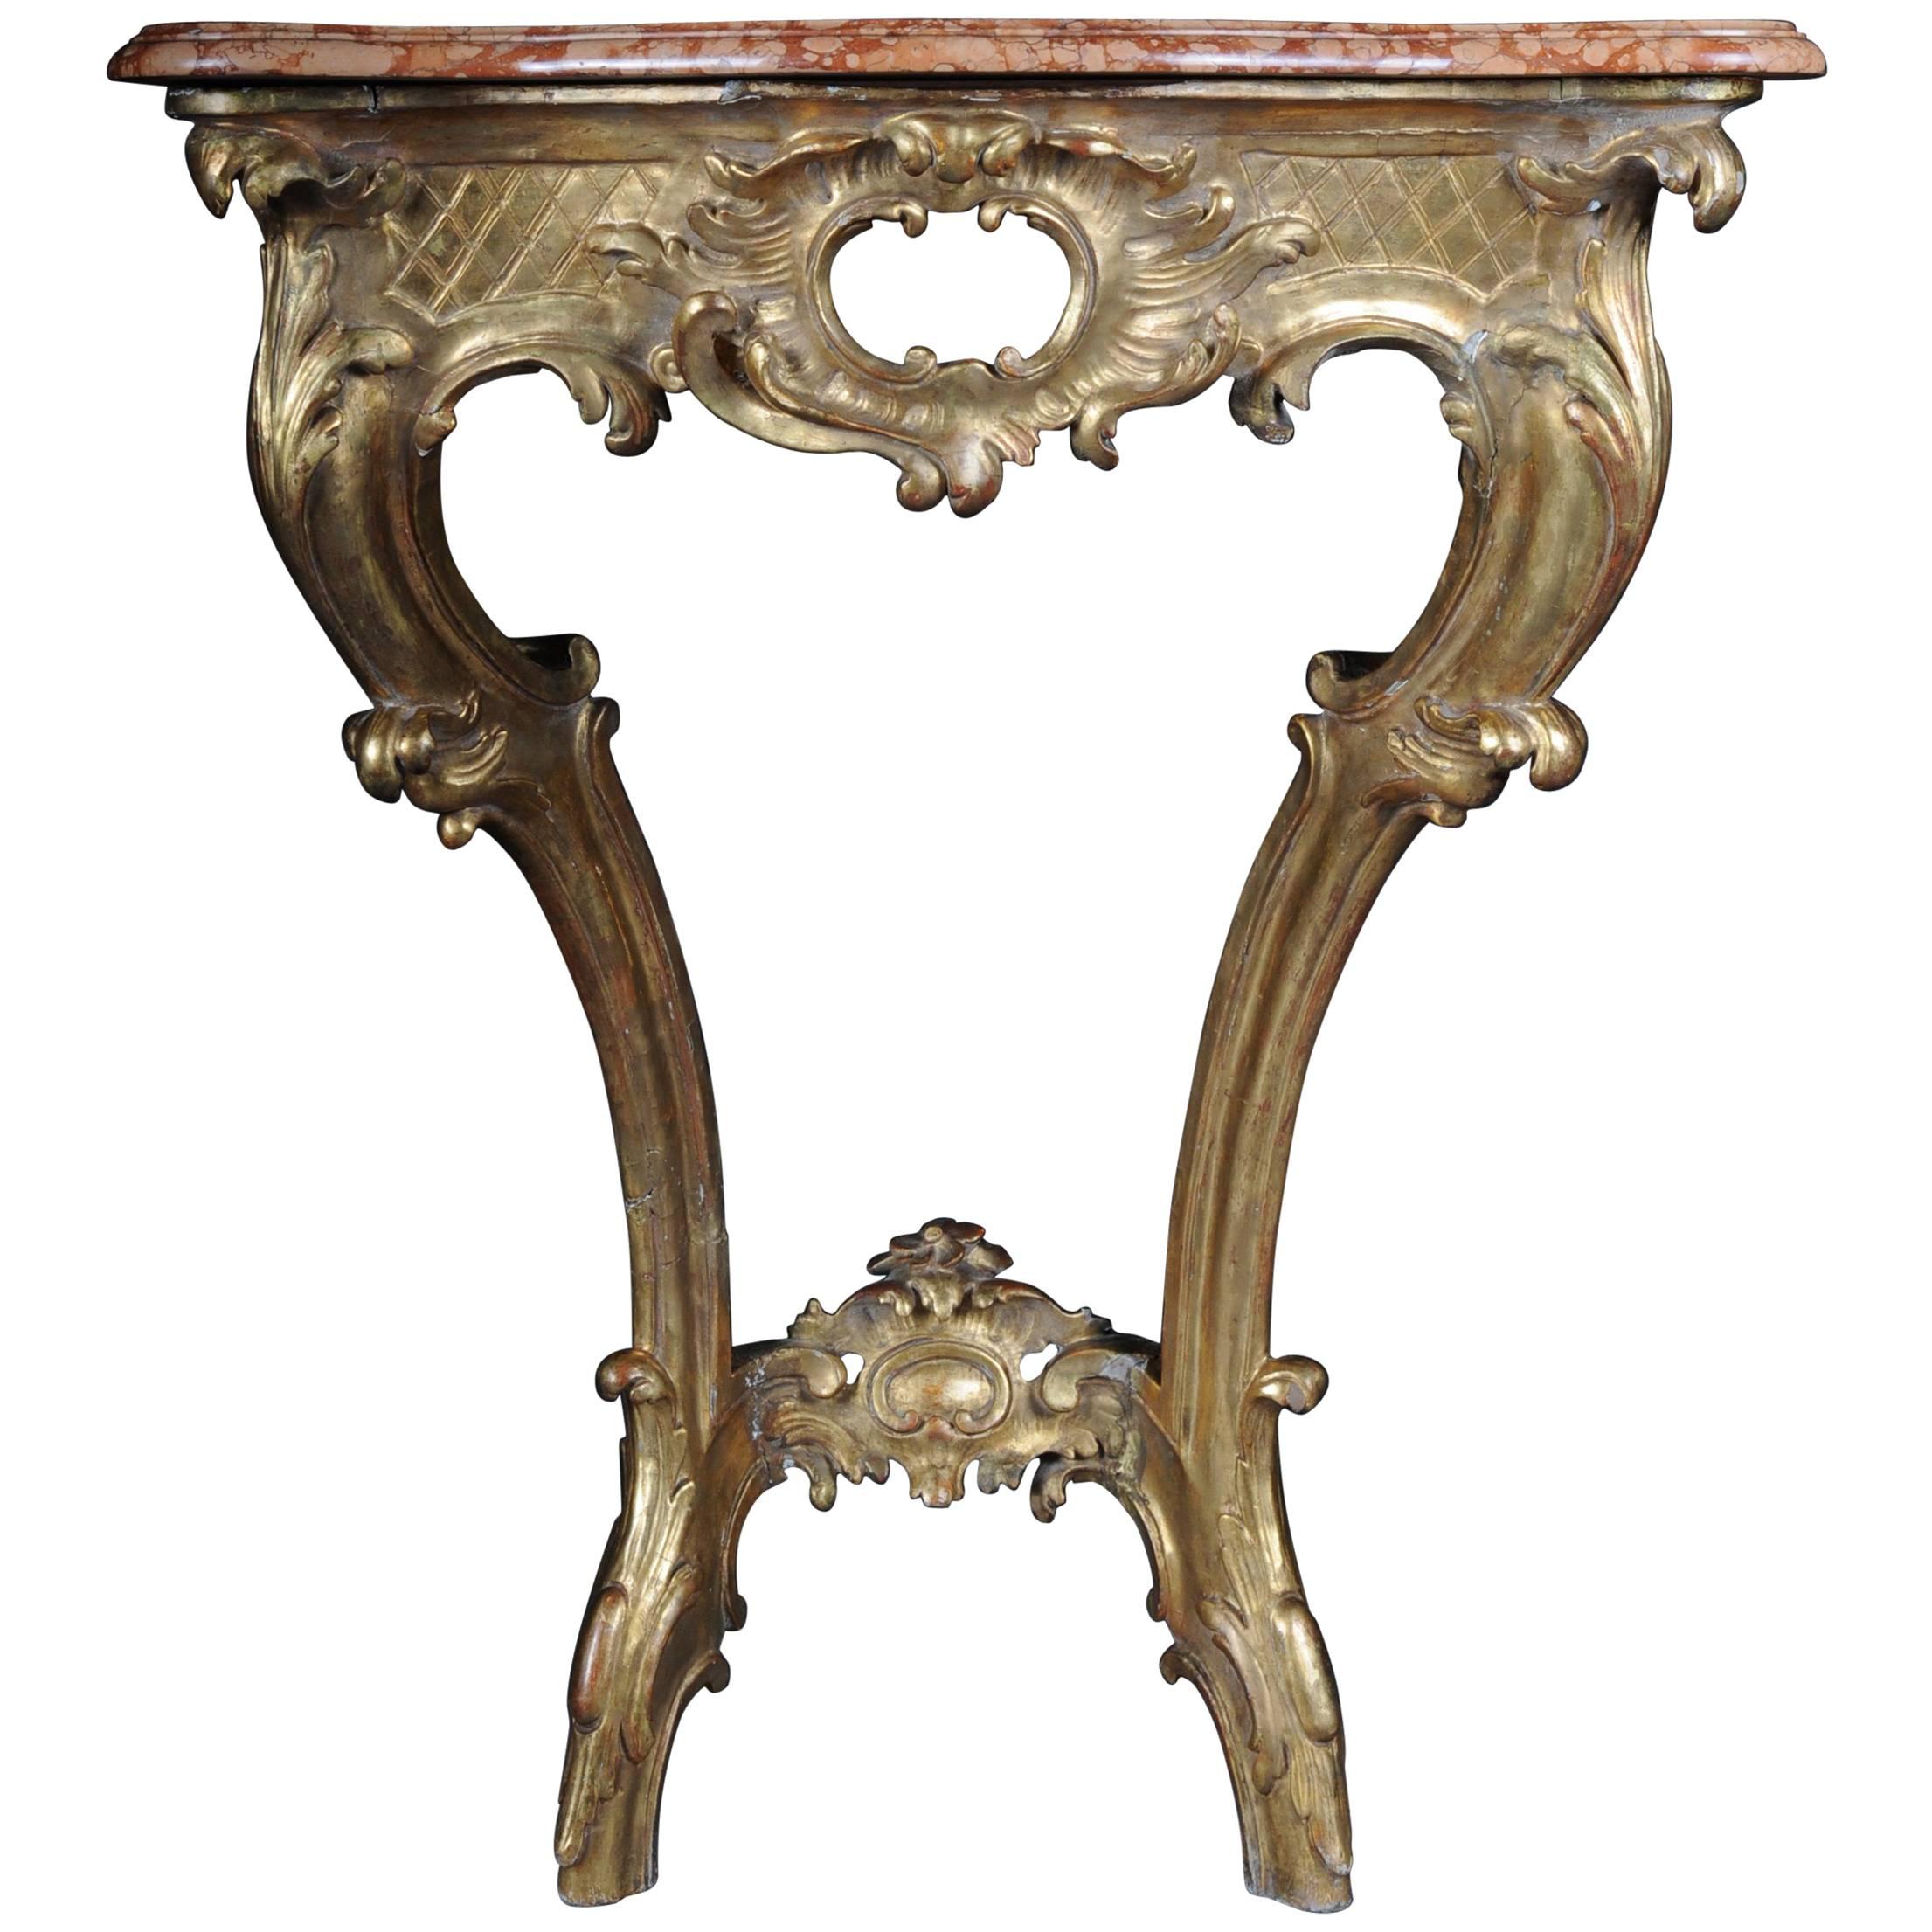 Antique French Console Table, circa 1790-1810